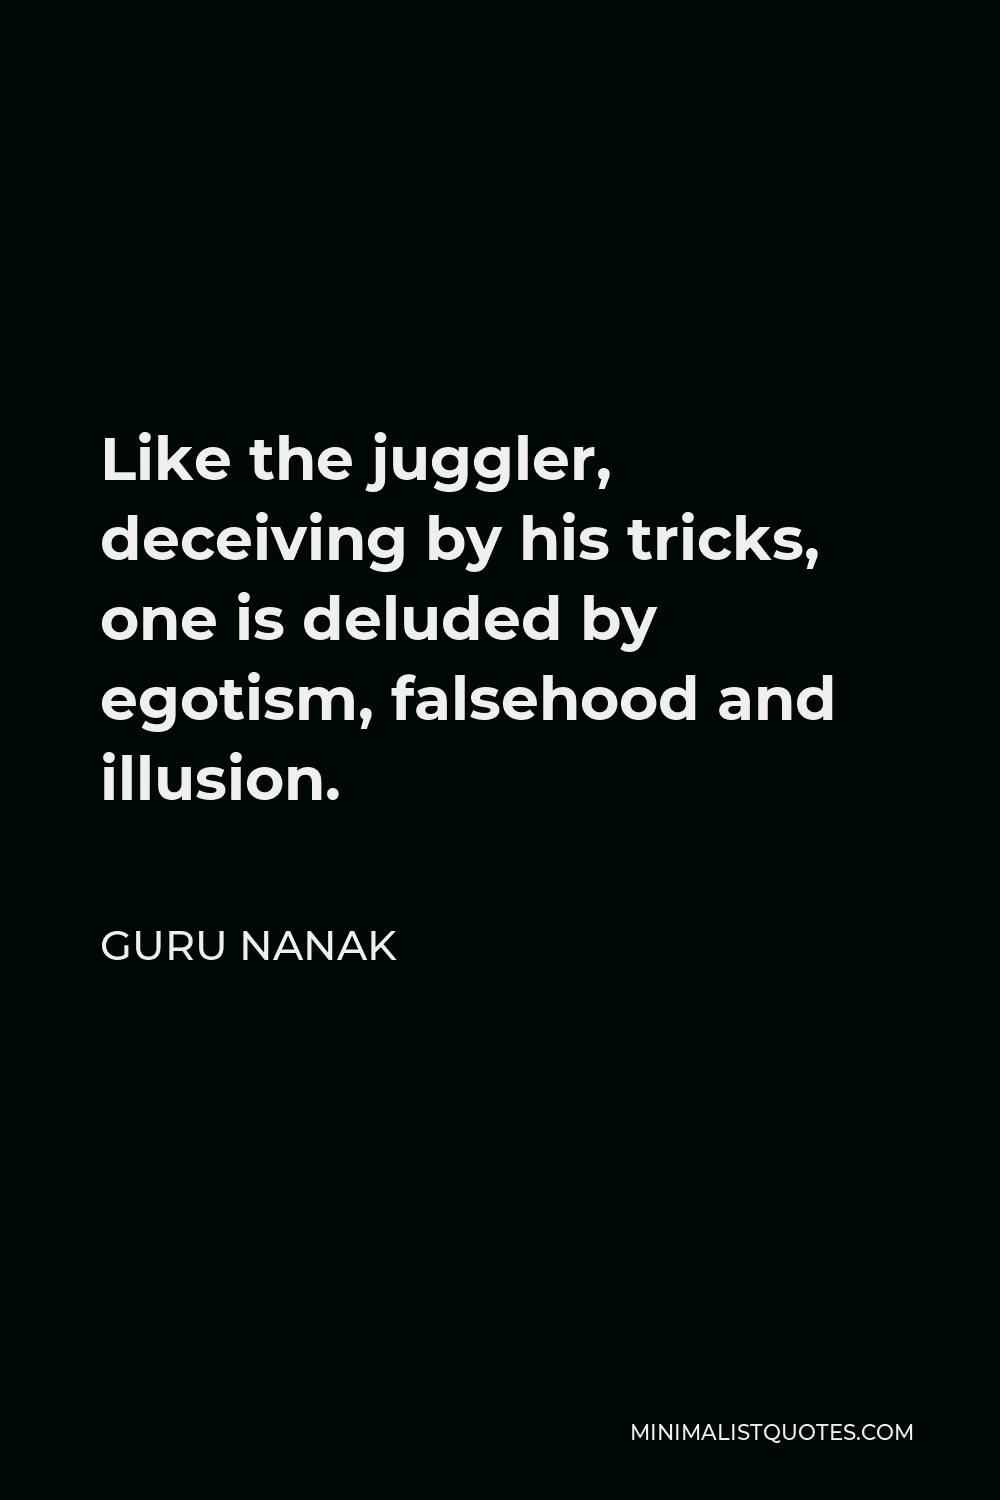 Guru Nanak Quote - Like the juggler, deceiving by his tricks, one is deluded by egotism, falsehood and illusion.